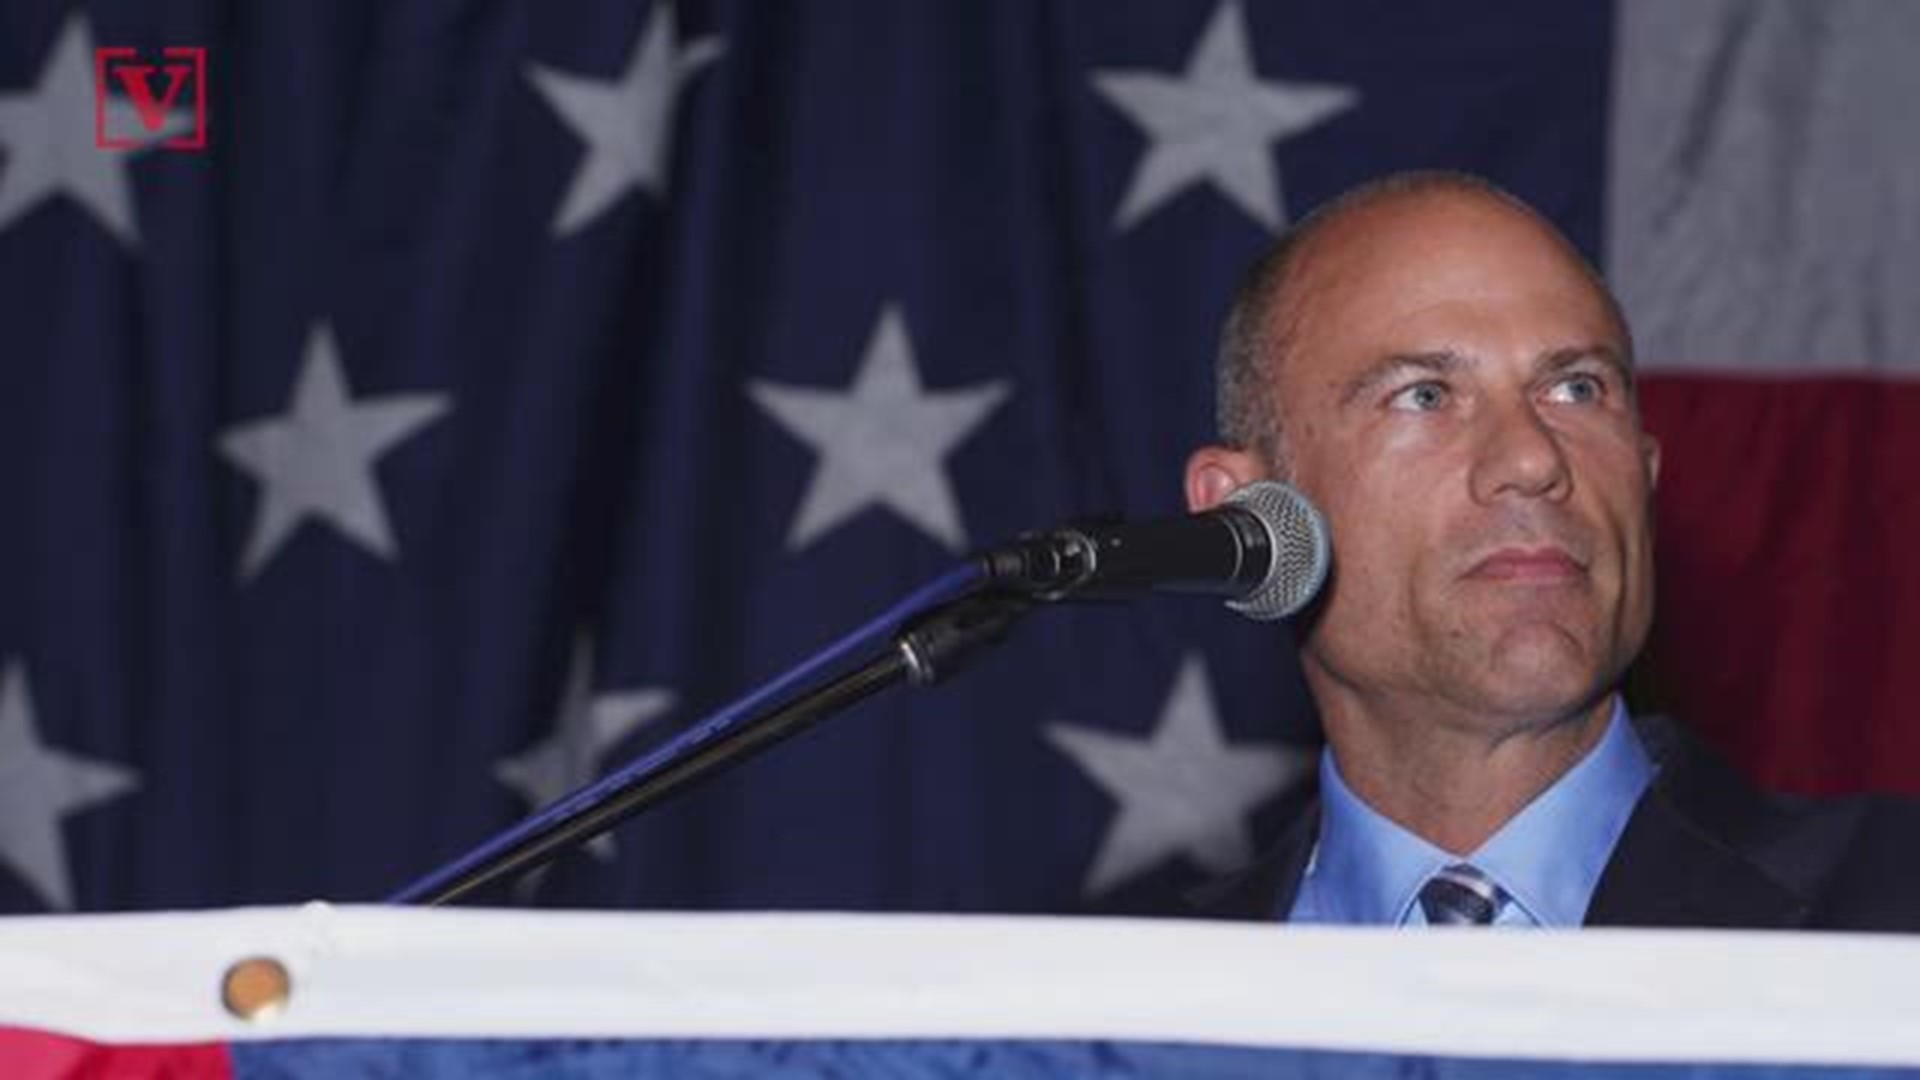 Stormy Daniels' Lawyer Michael Avenatti says he has a new client that has 'credible information' against Supreme Court nominee Brett Kavanaugh.